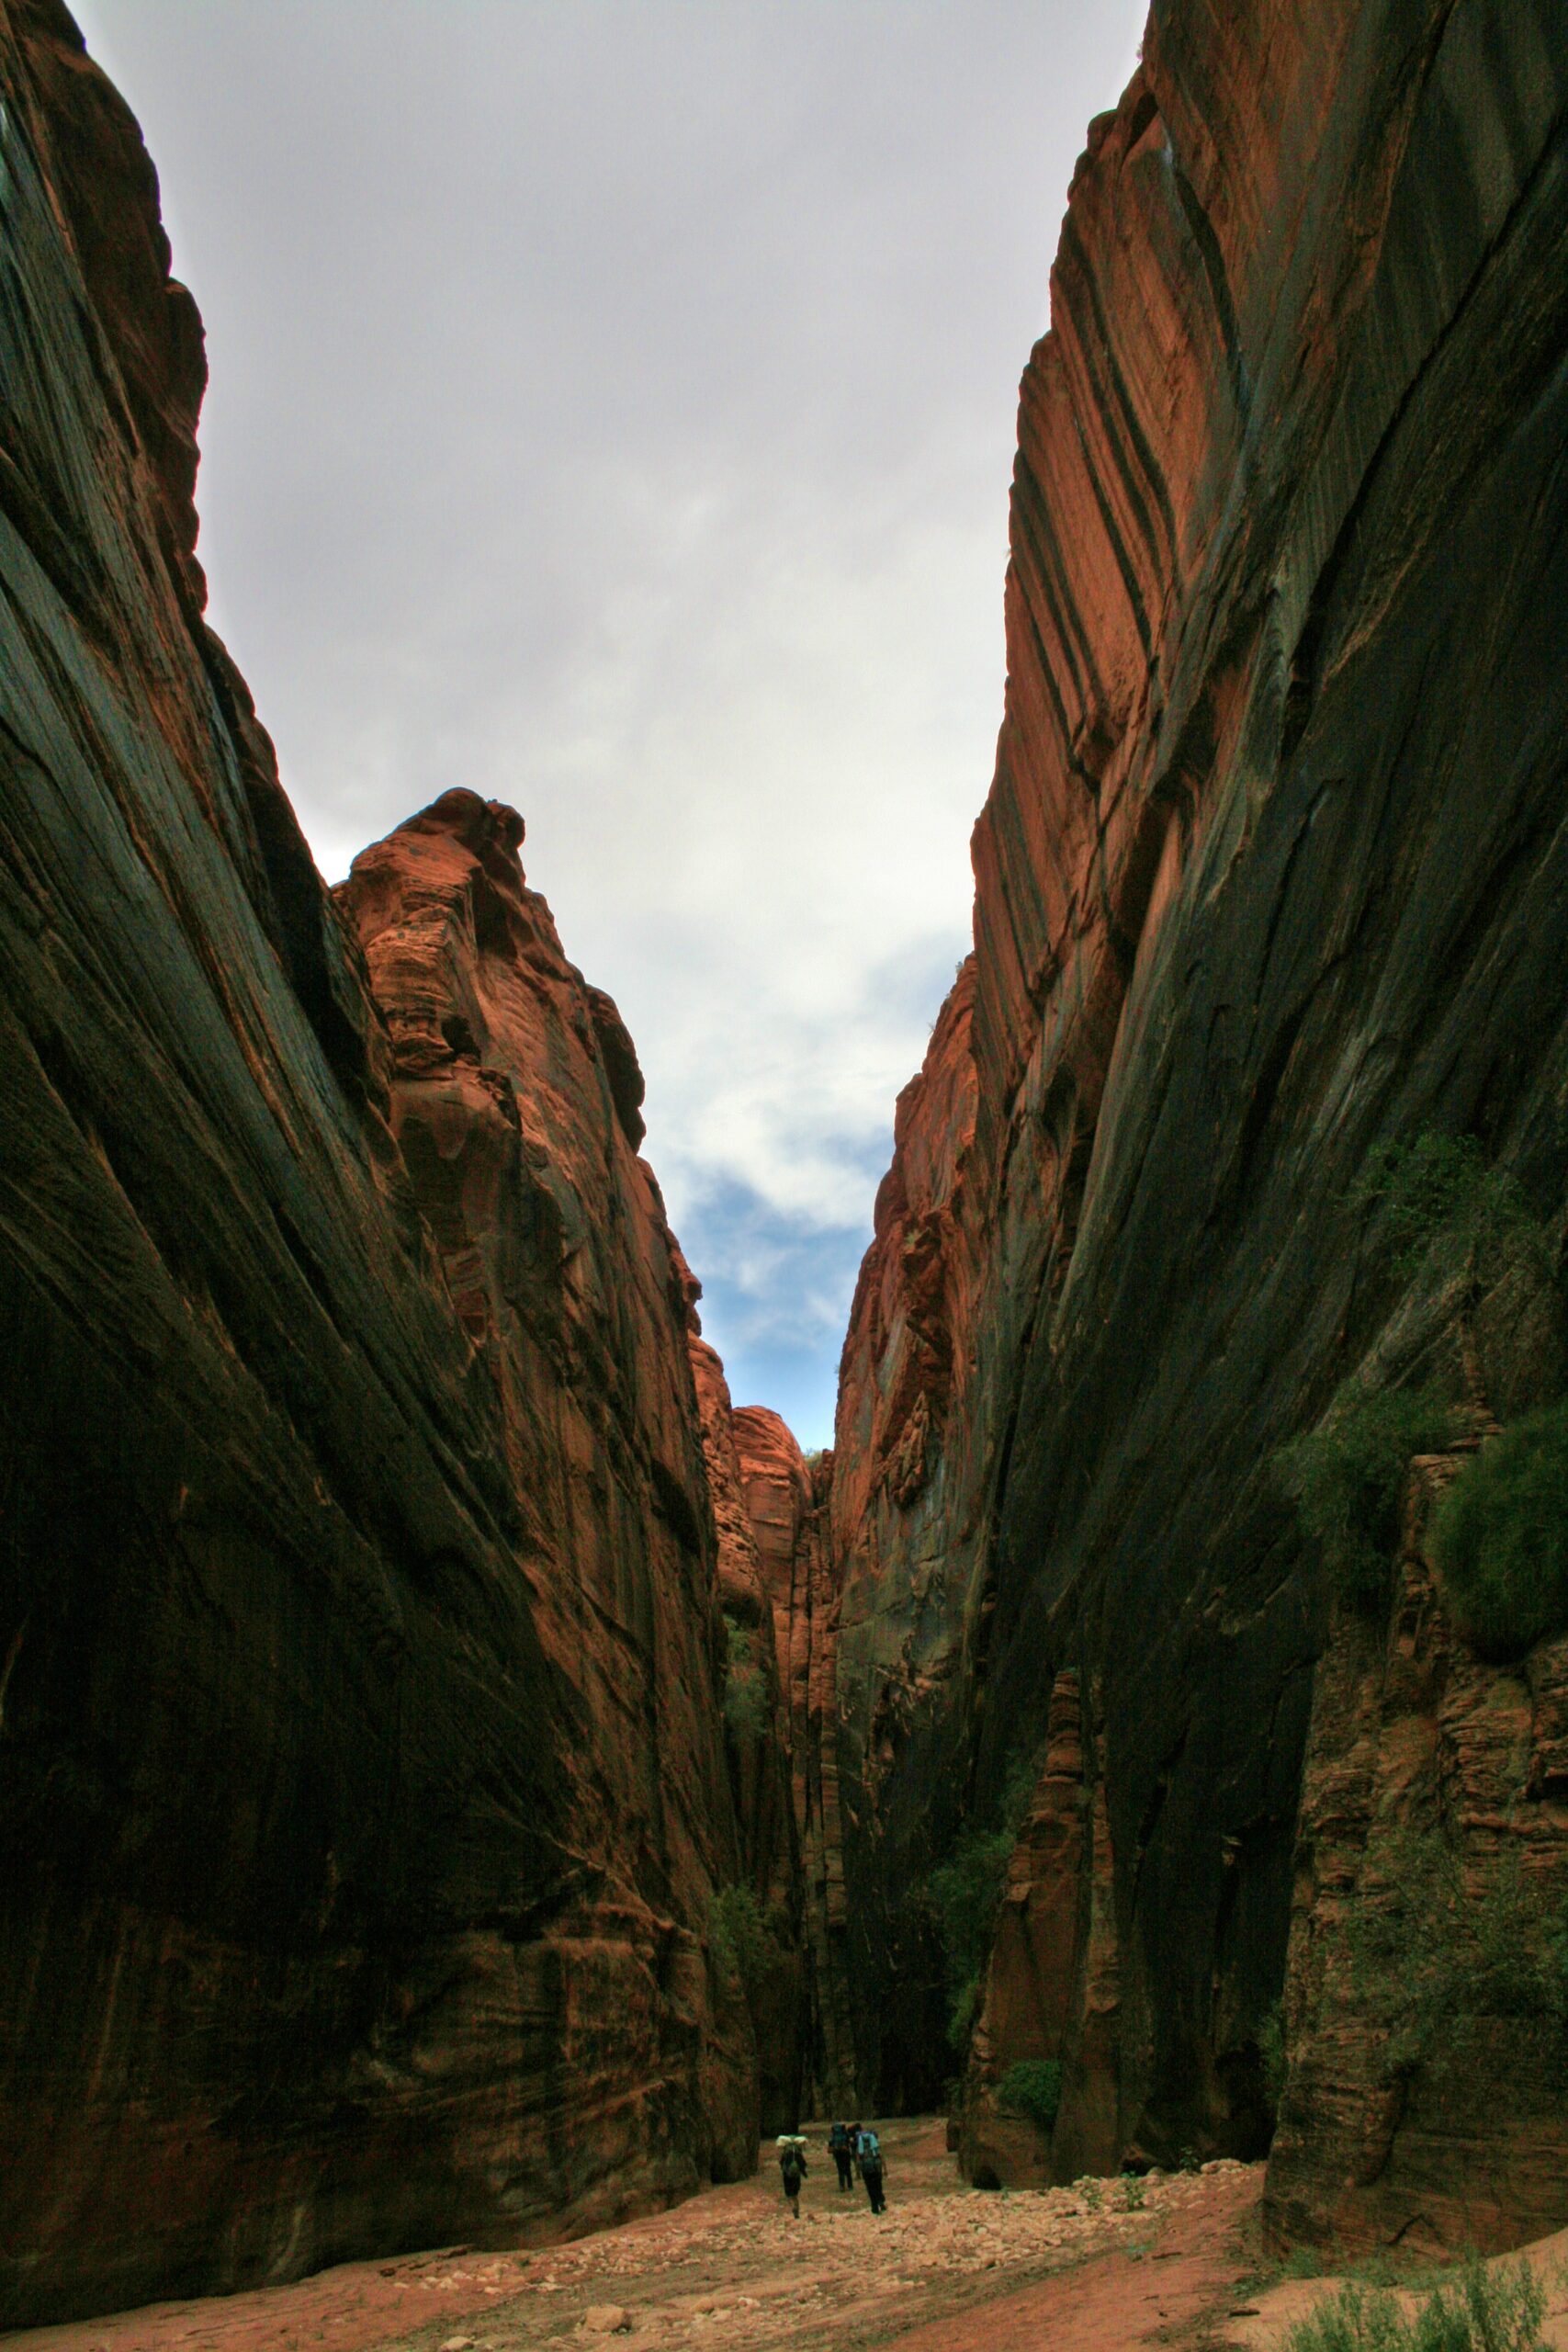 Hikers make their way through a particularly wide section of Buckskin Gulch.